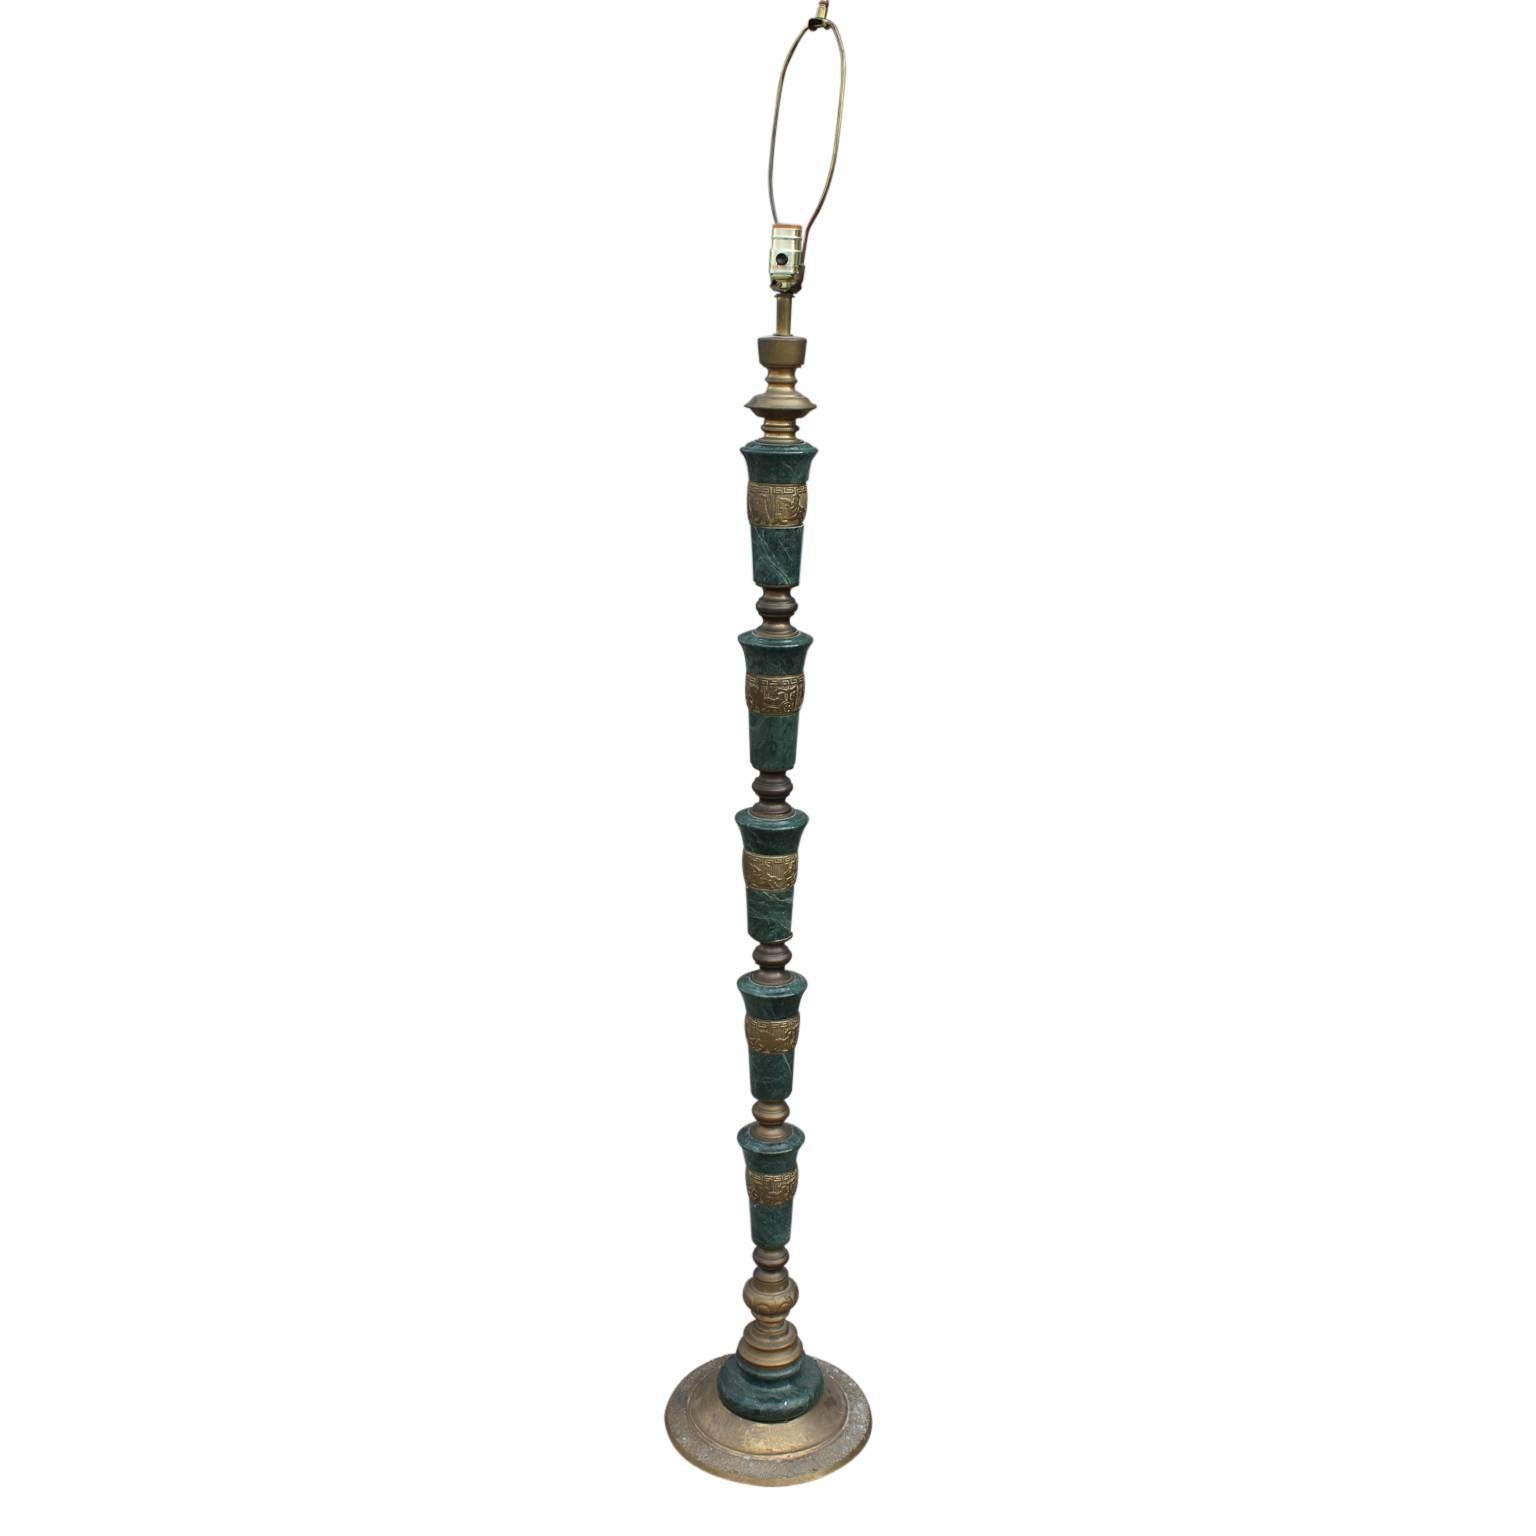 Pair of green marble and brass modern floor lamps with an Asian/Oriental inspiration.